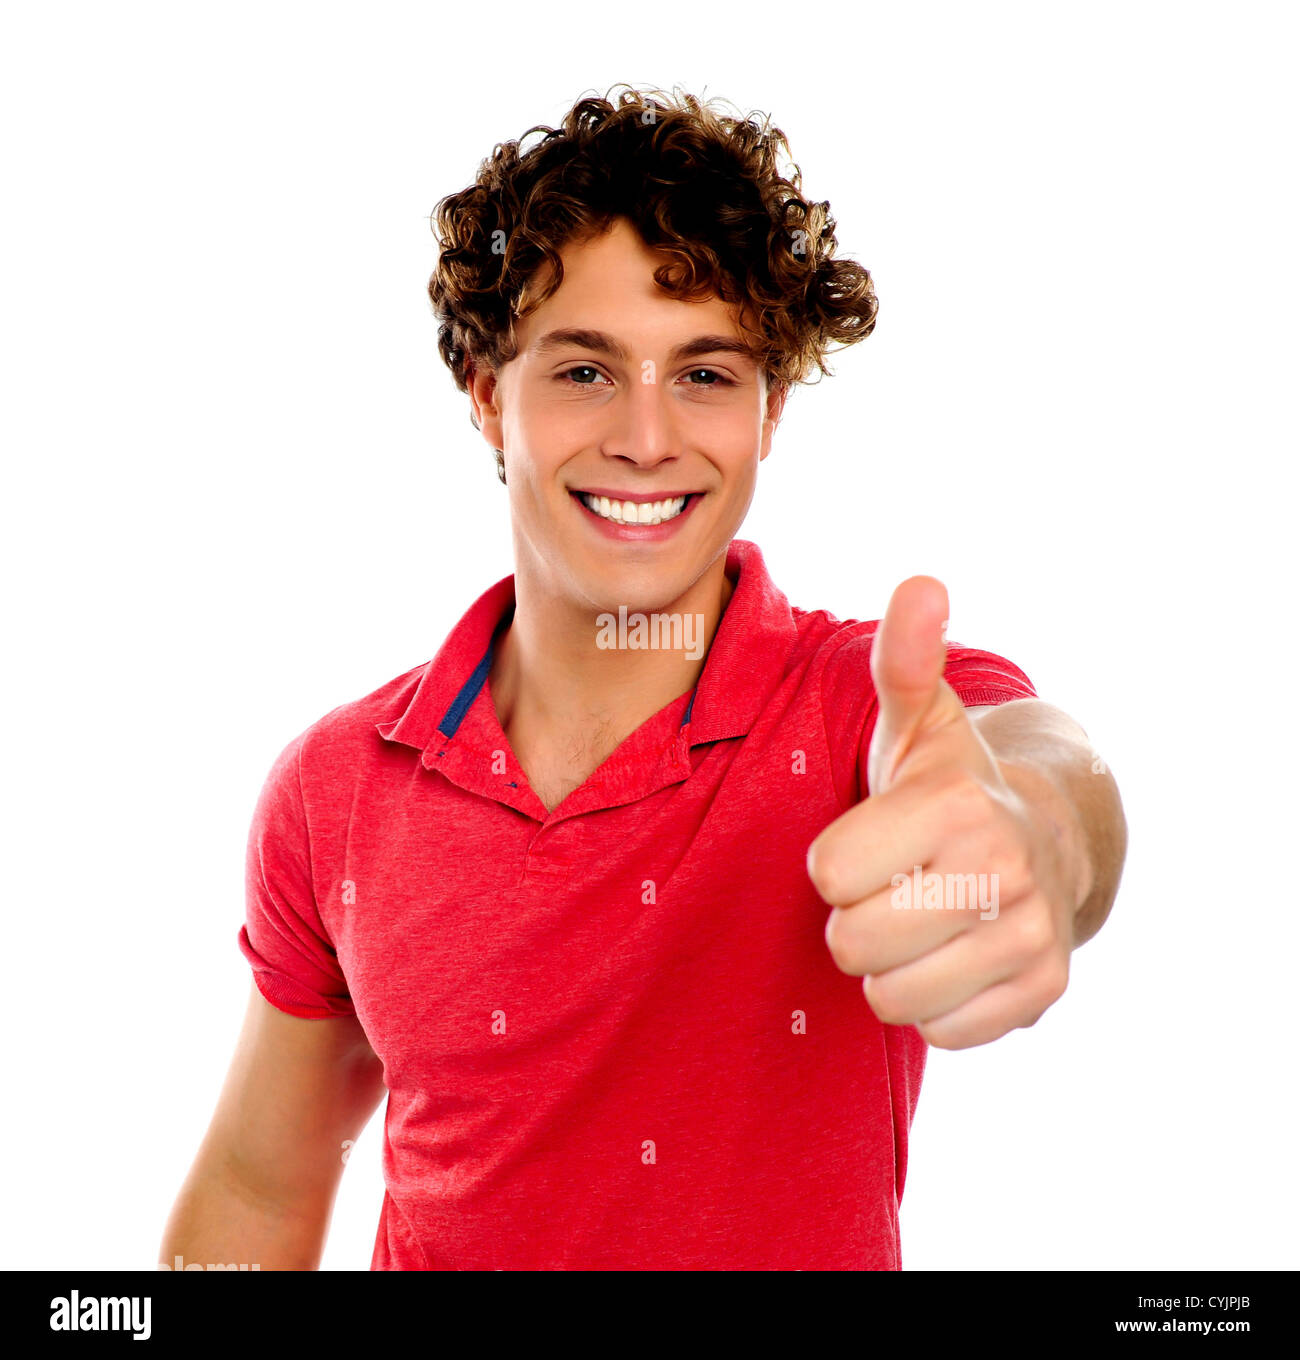 Handsome young man gesturing thumbs-up isolated on white Stock Photo